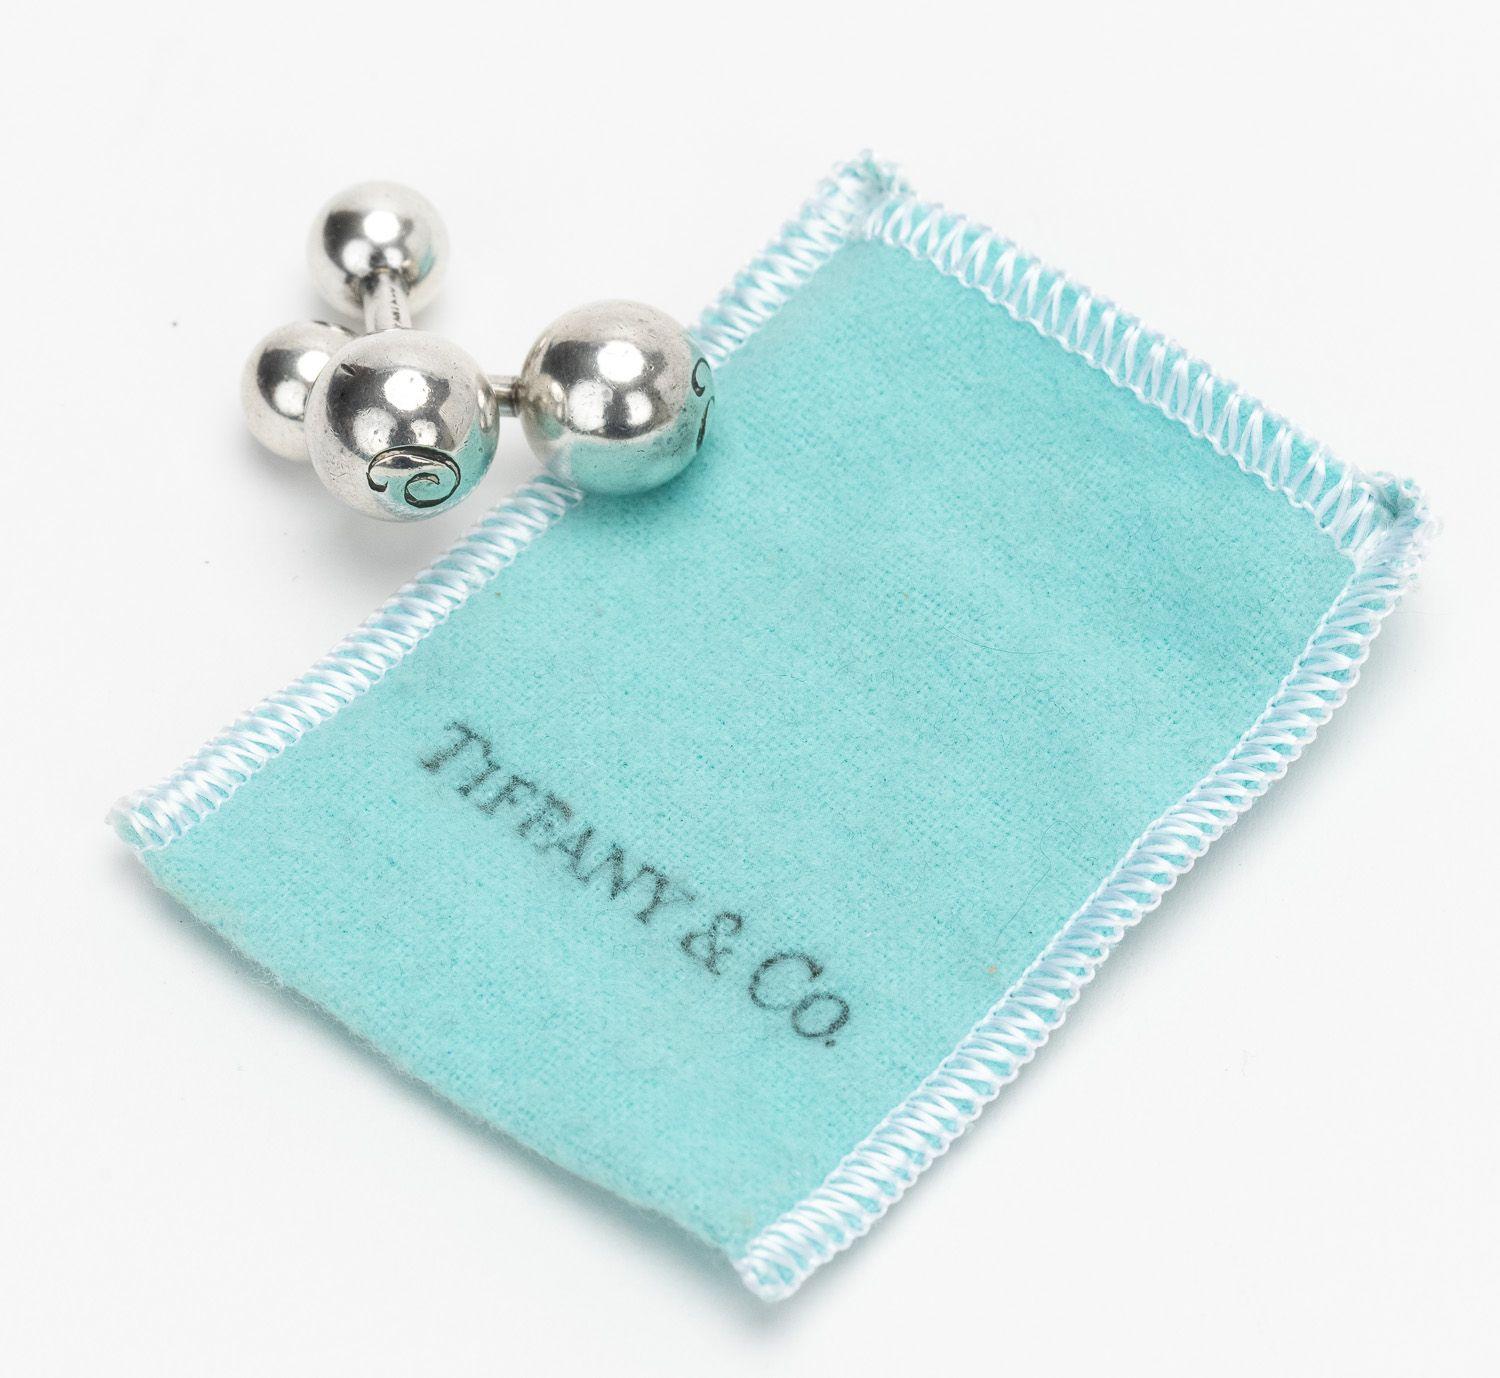 Tiffany & Co. Sterling Silver Cufflinks with C letter engraved. Excellent condition.
Original gift pouch.